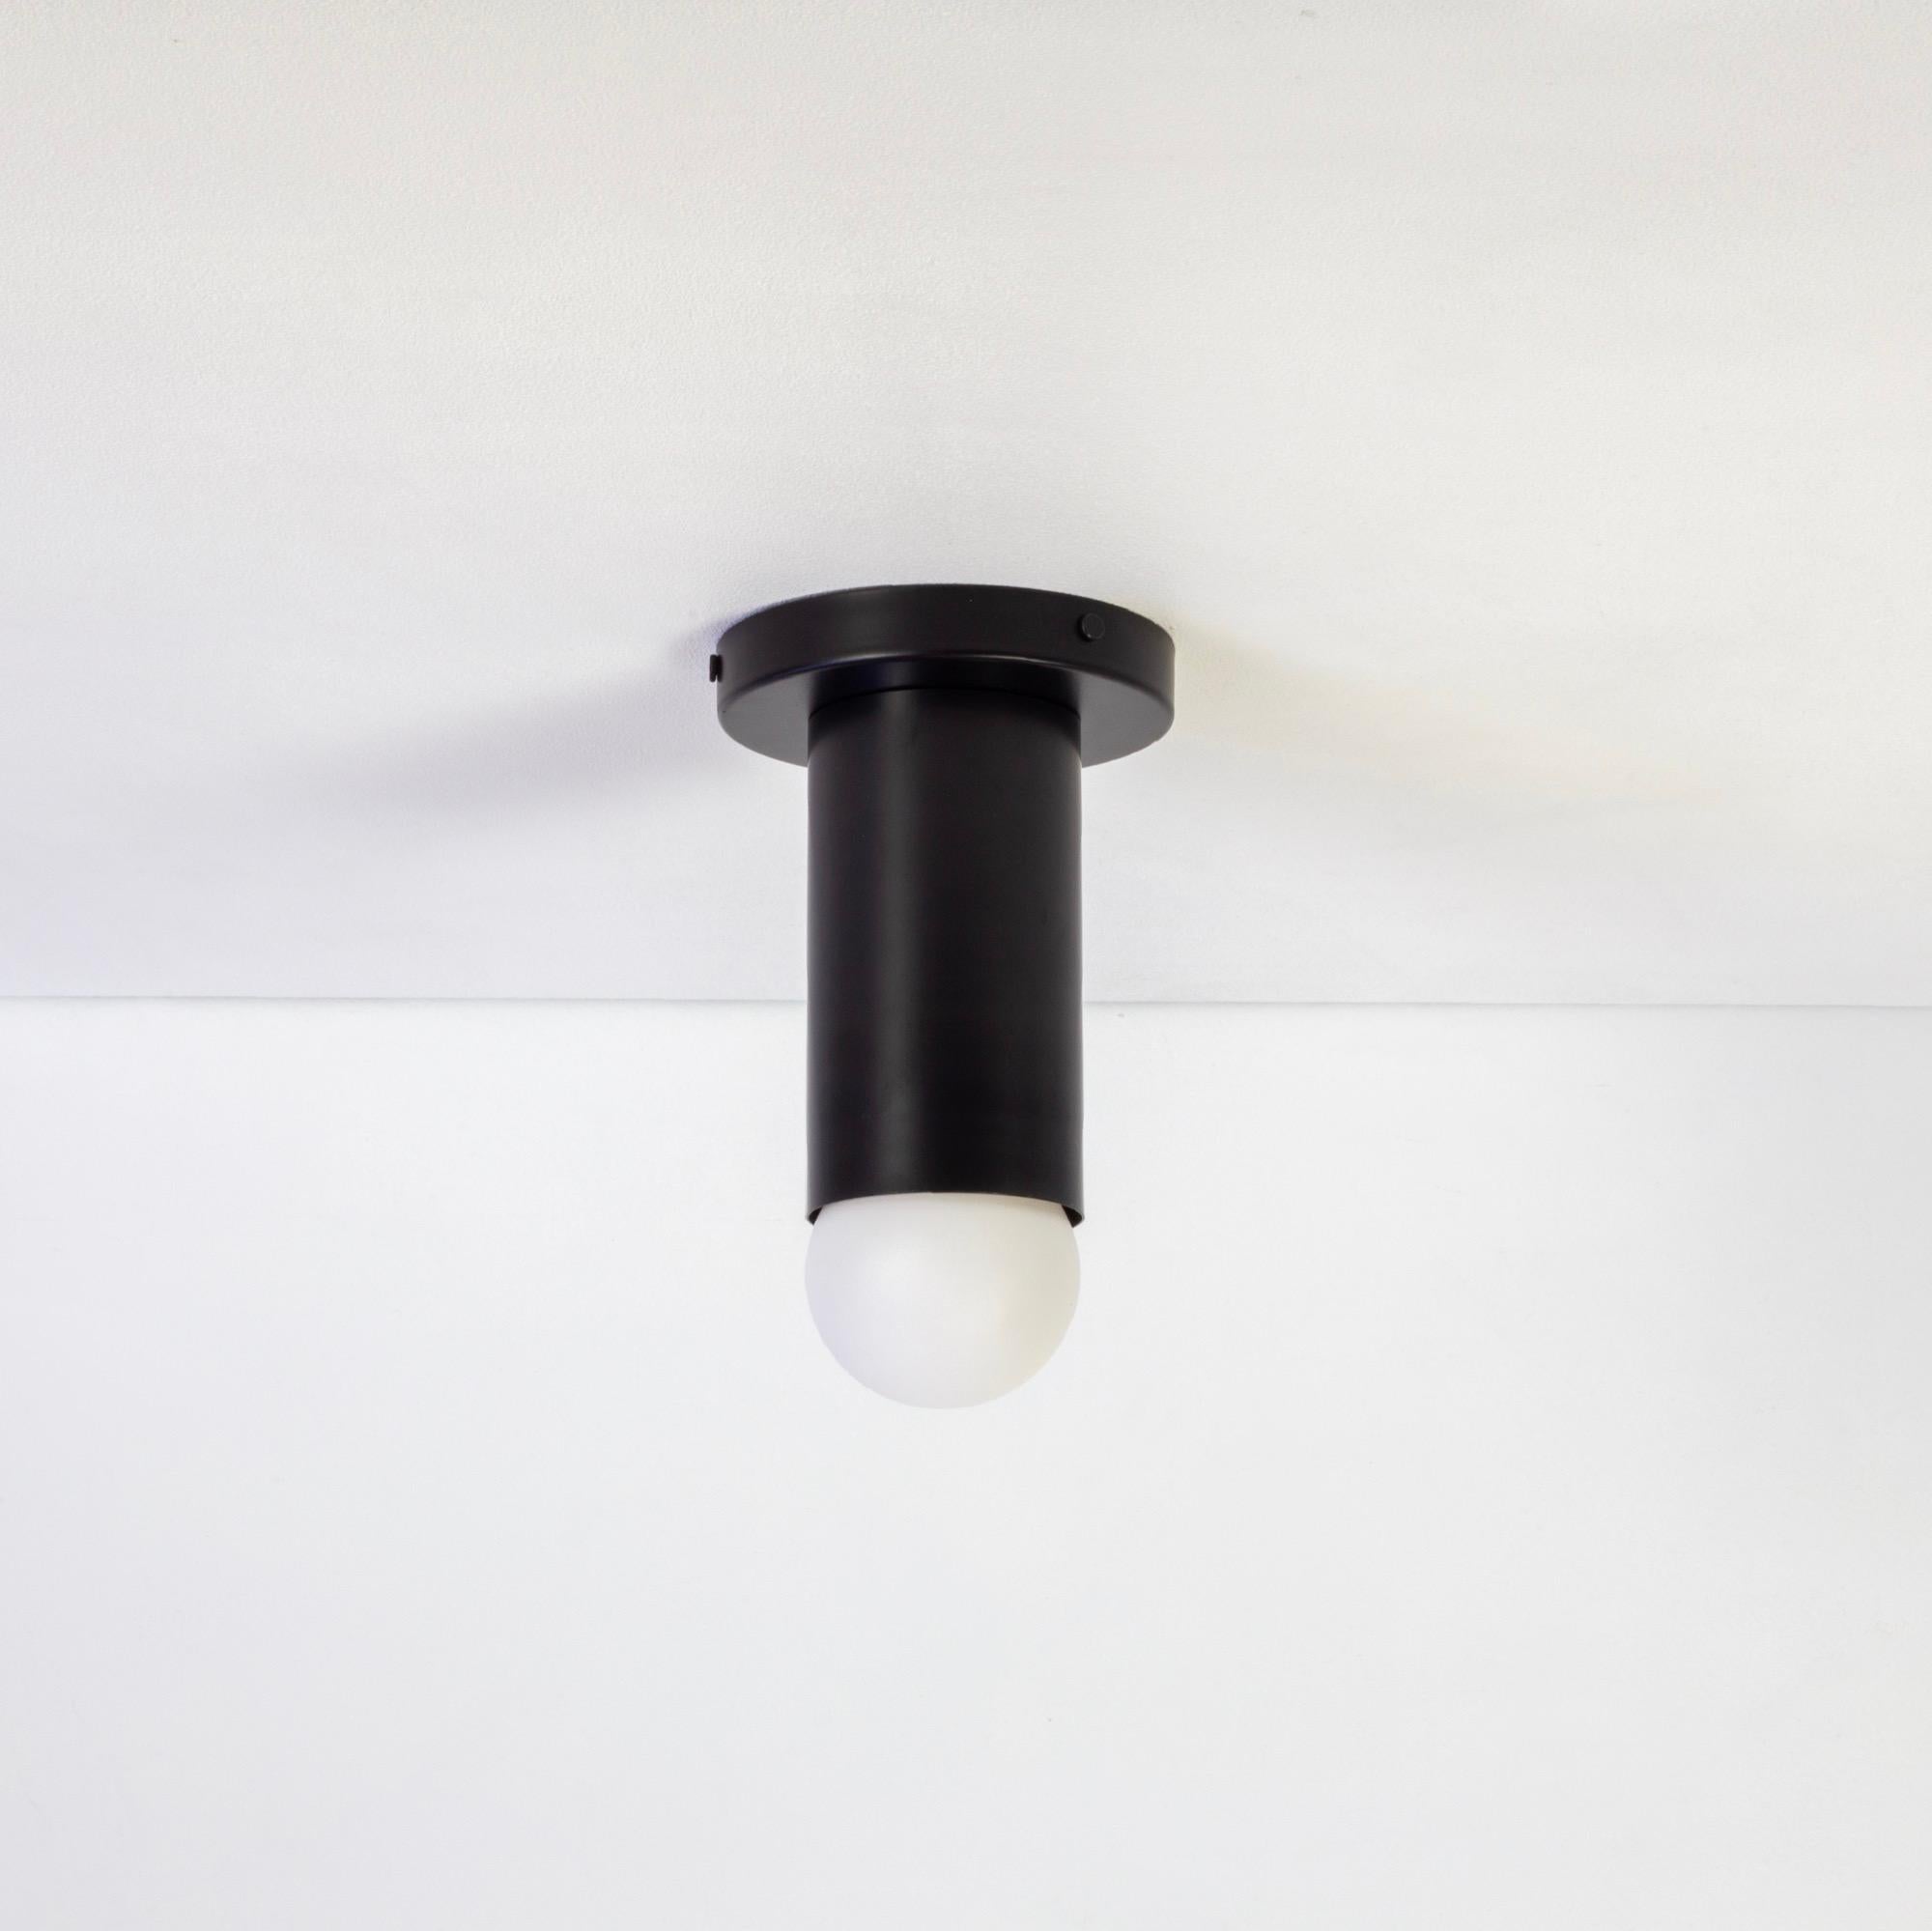 Deep Flush Mount by Research.Lighting, Black, In Stock In New Condition For Sale In Brooklyn, NY